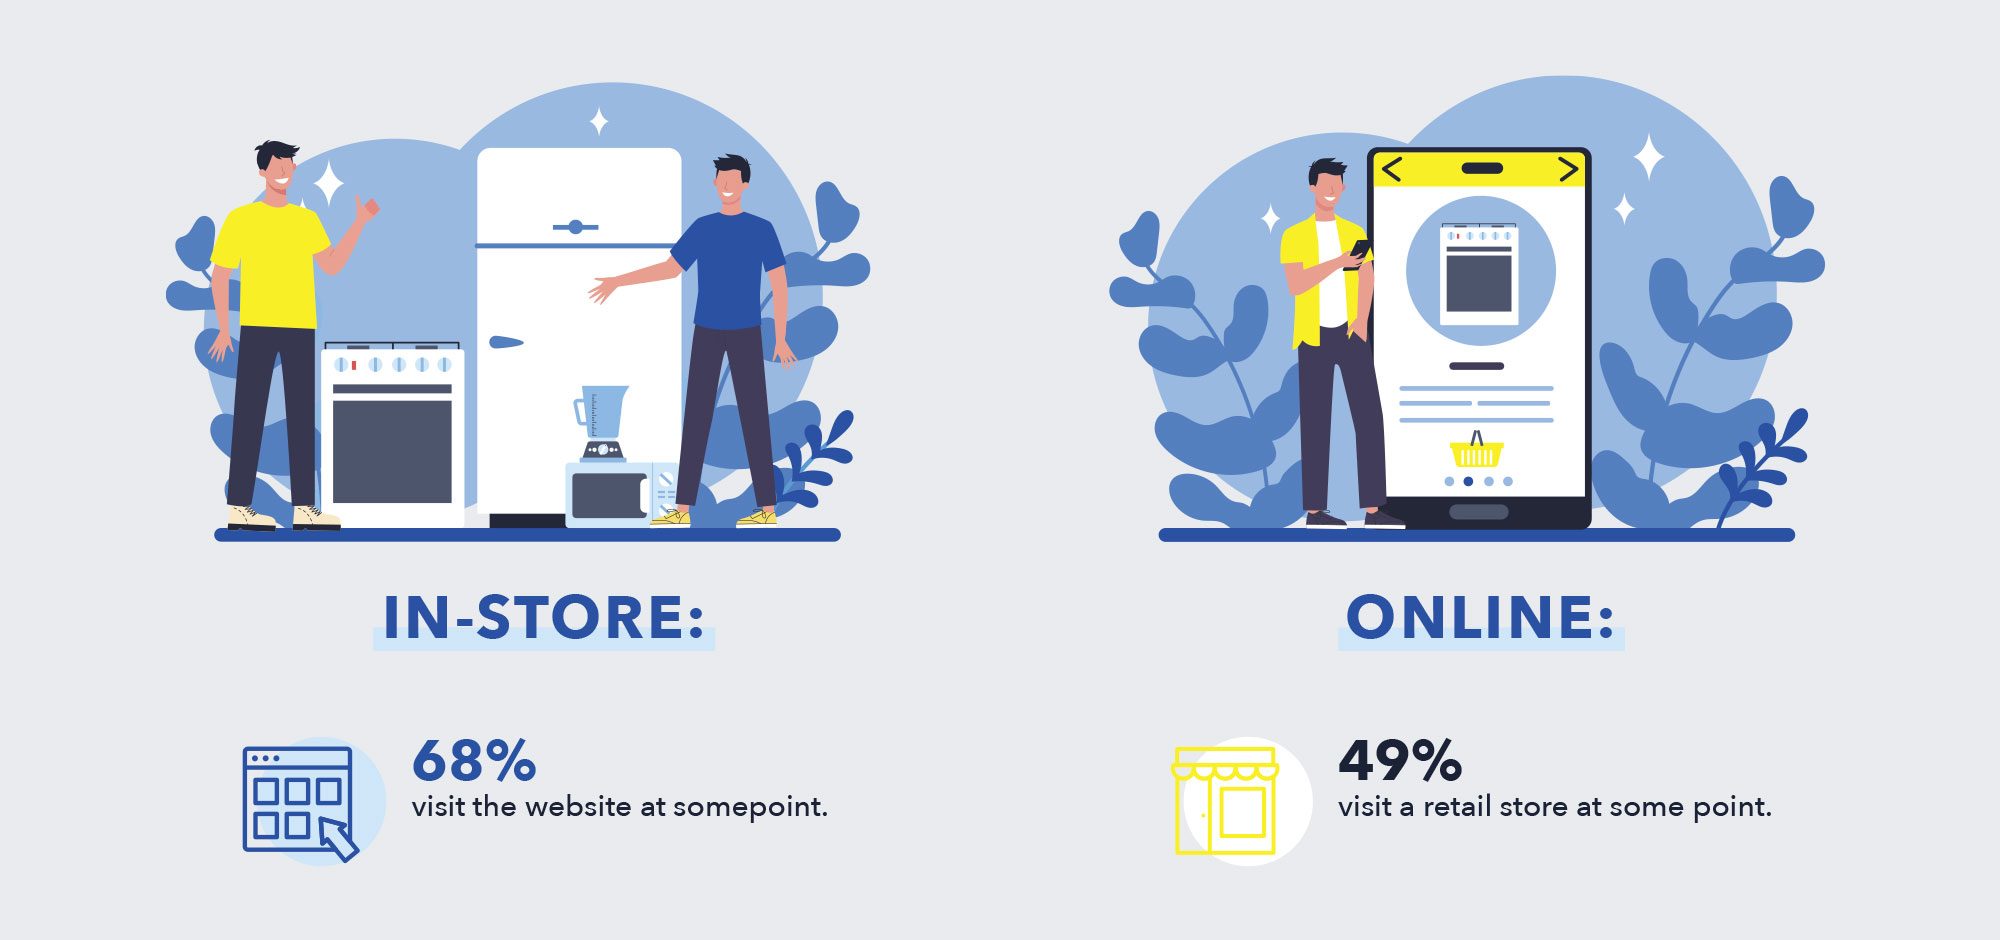 7 in 10 shoppers looked online before they bought in-store.